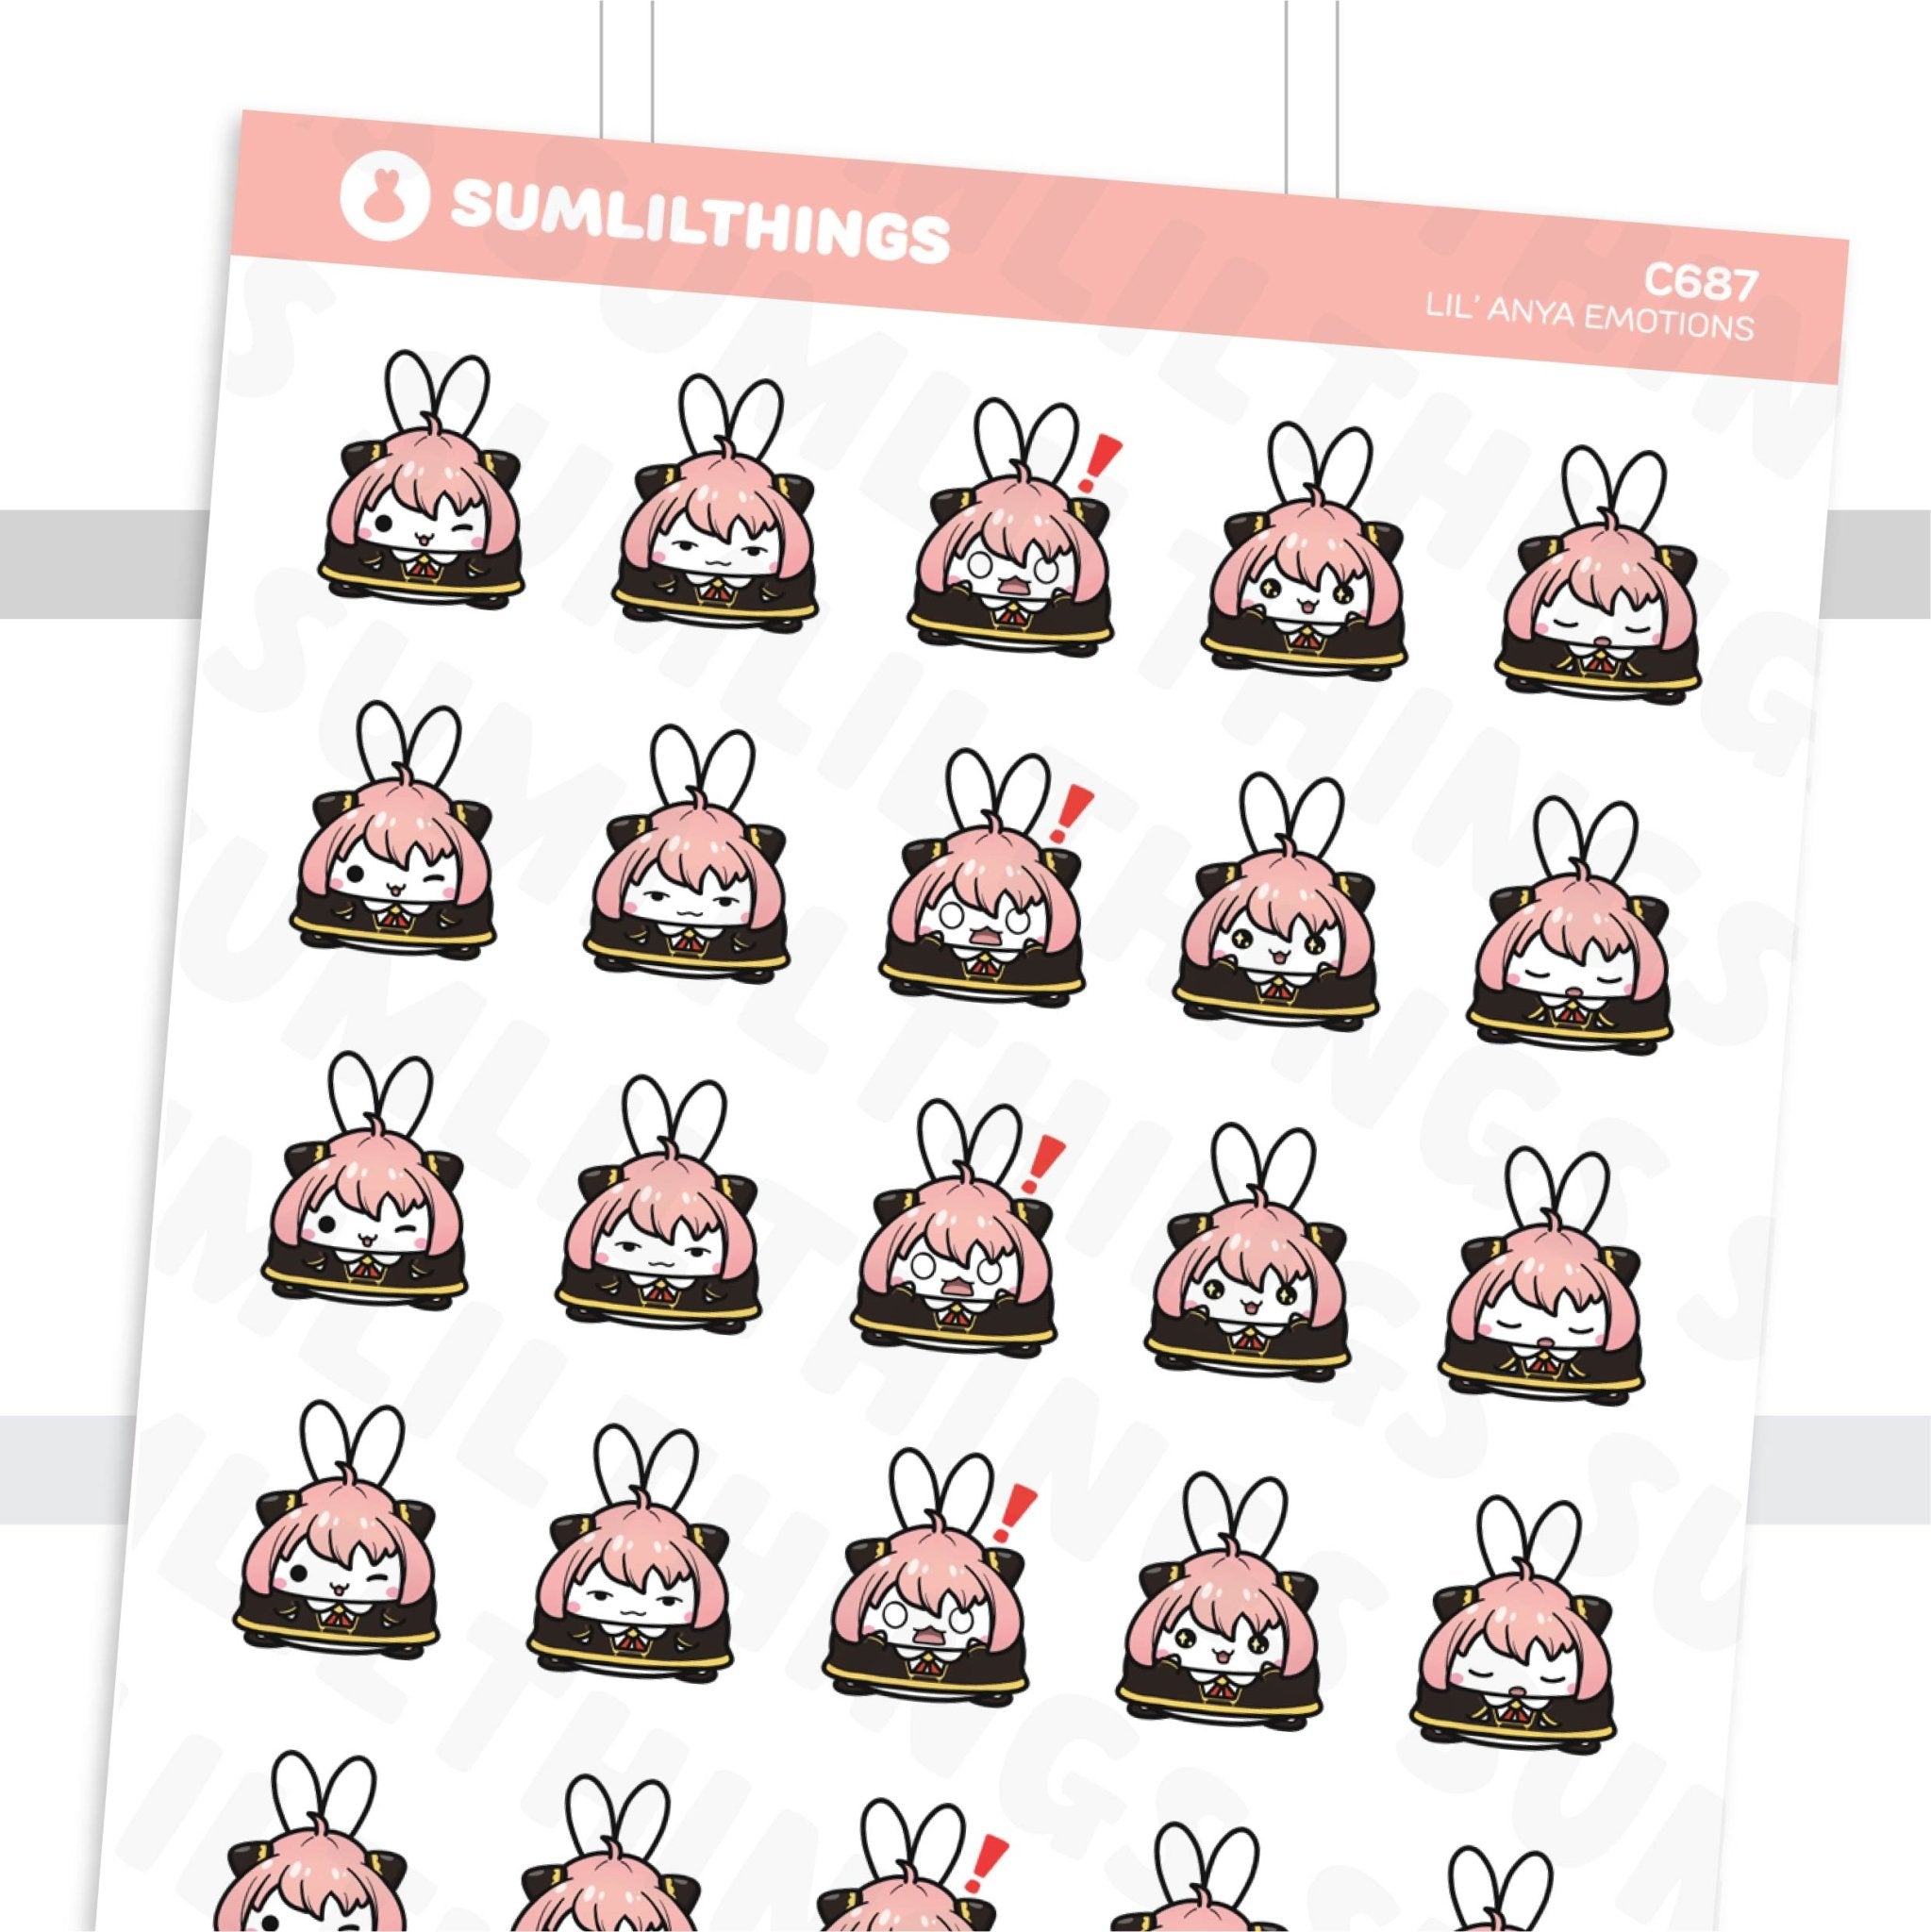 Spy Family Emotions Stickers - SumLilThings